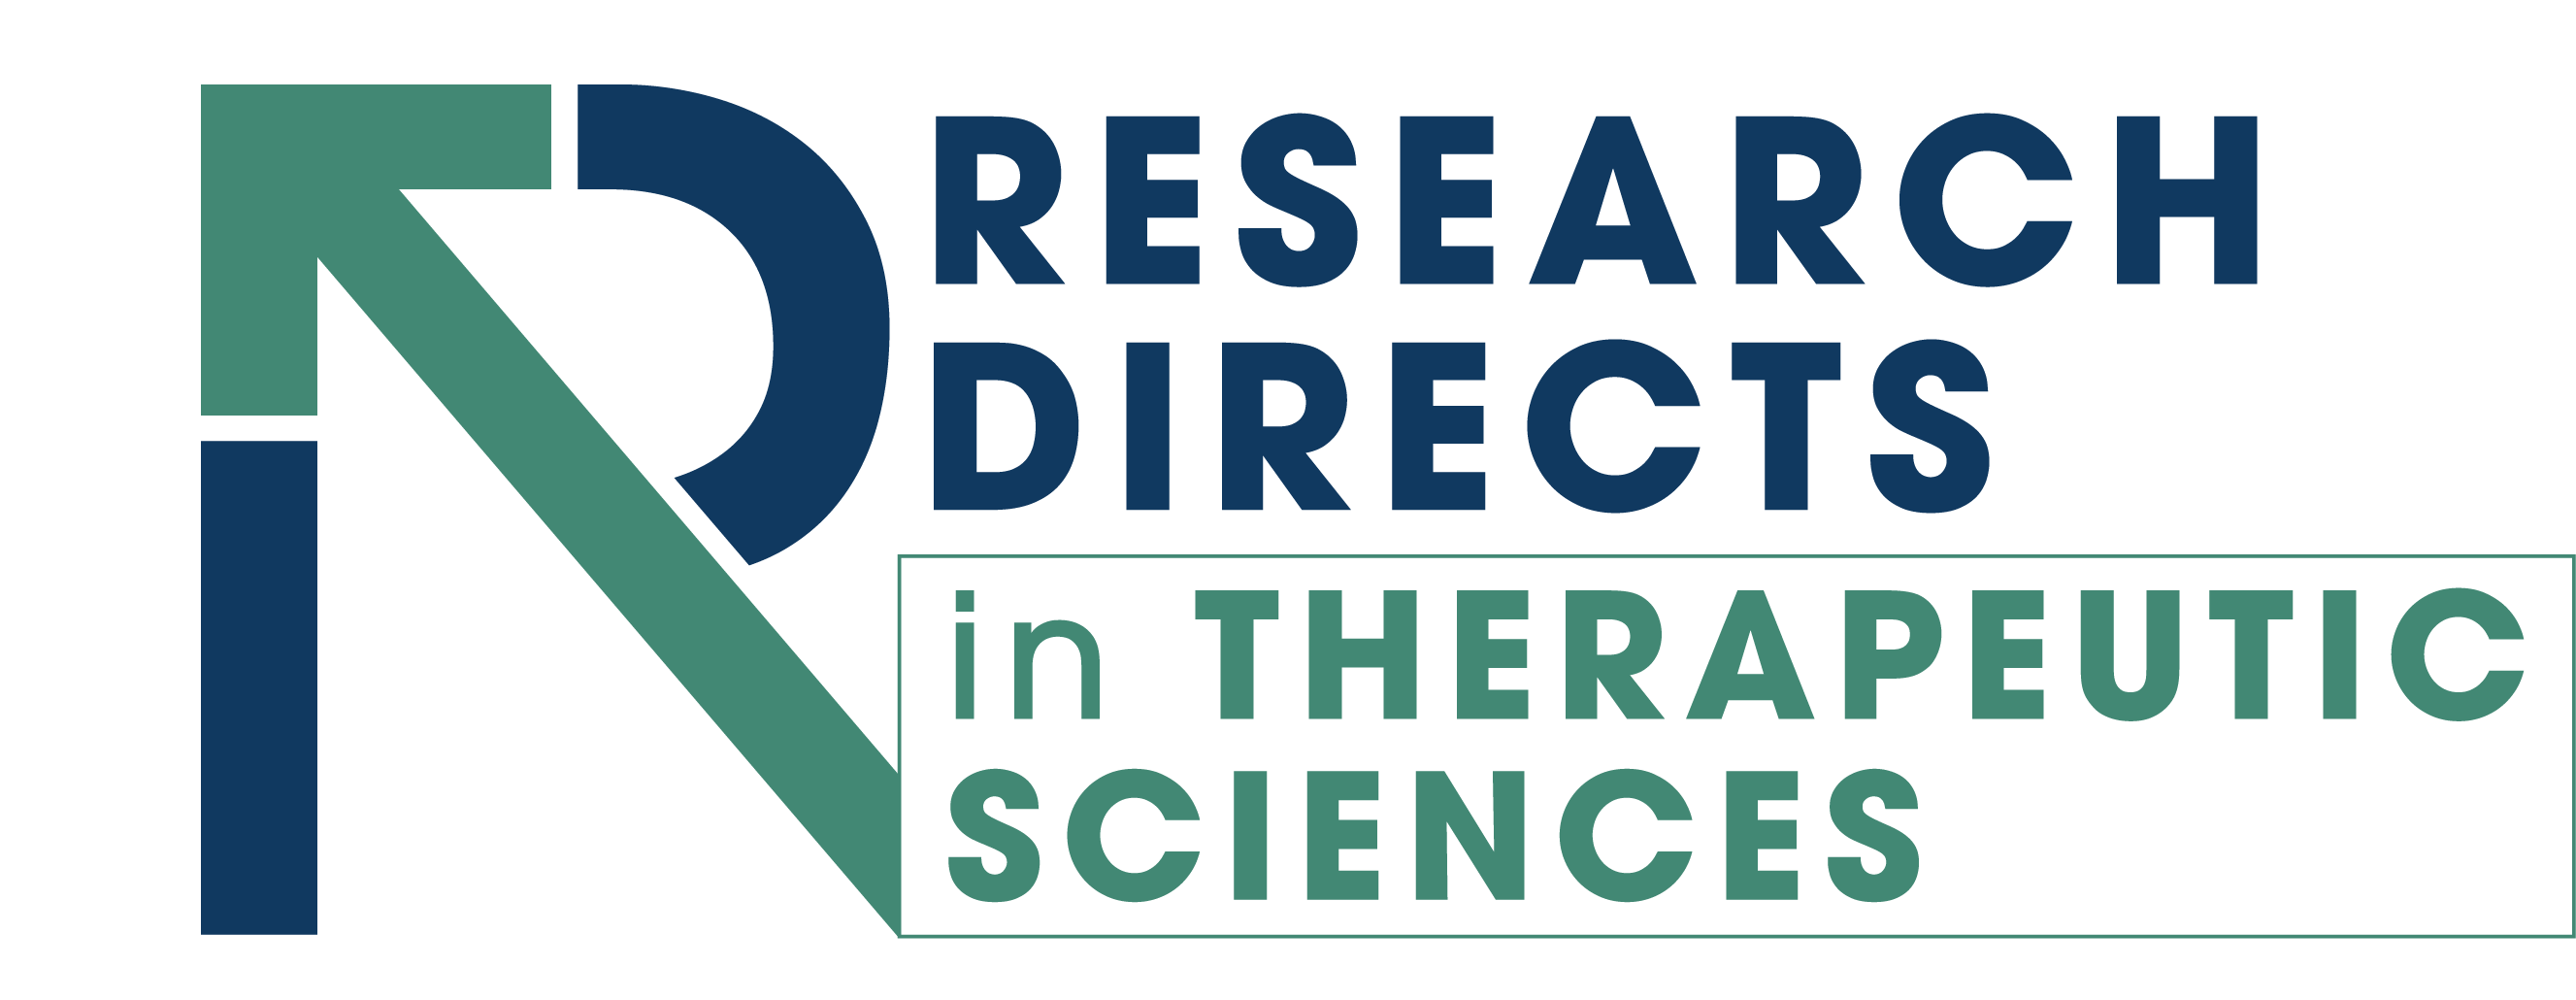 Research Directs in Therapeutic Sciences